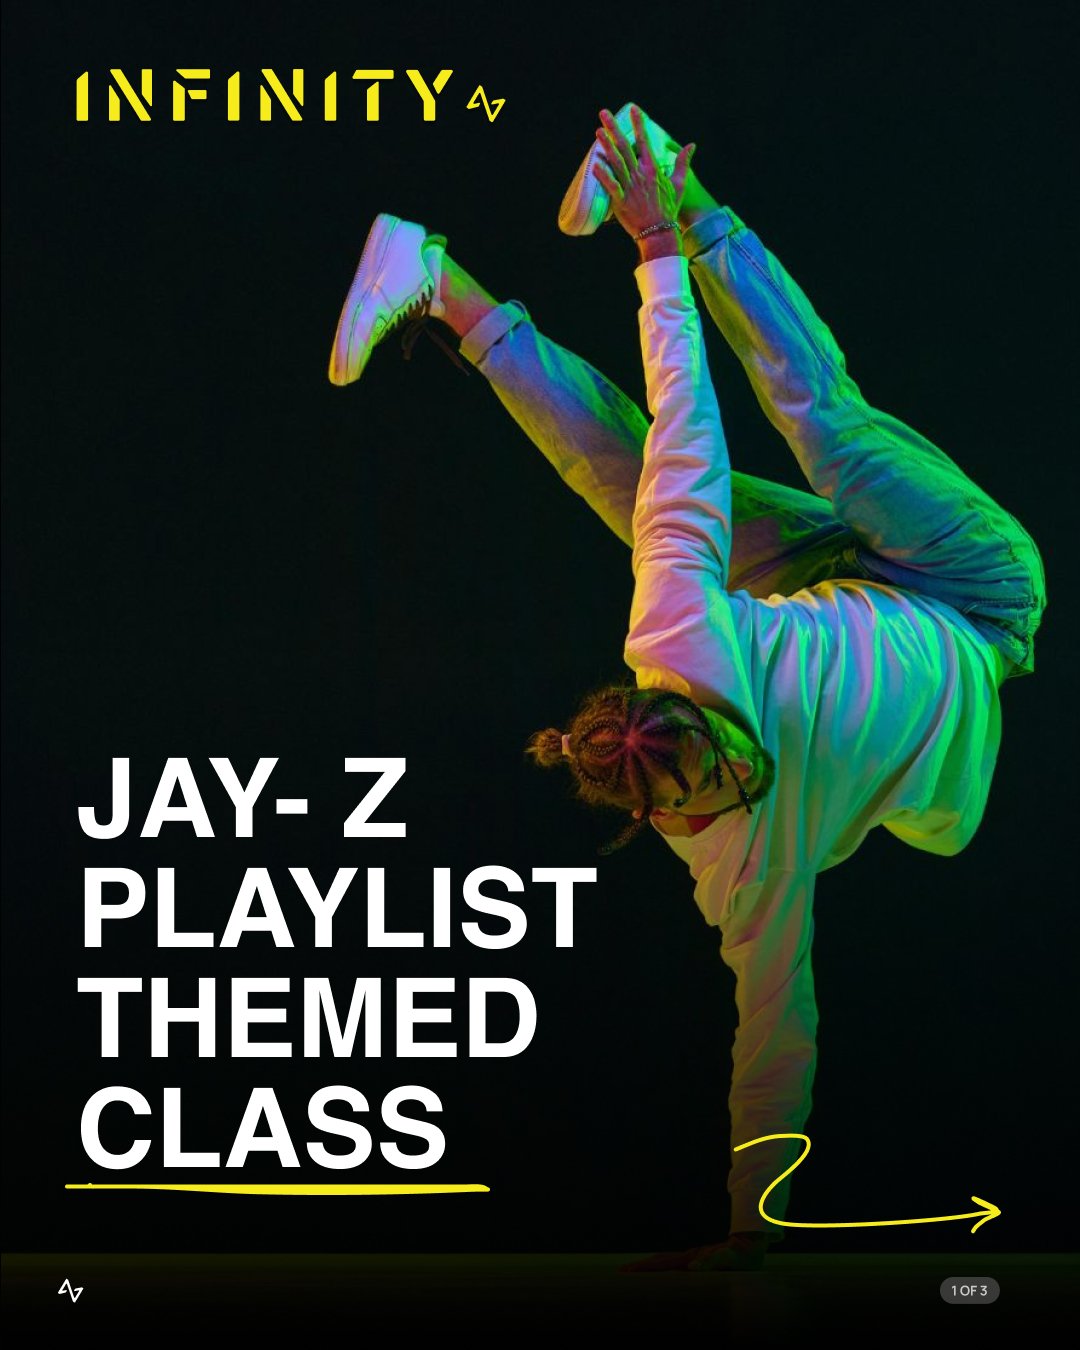 Dive into the world of hip-hop royalty with our Jay-Z playlist themed class! 🎵

Elevate your workout with beats from one of music's greatest icons. Whether you're feeling like a billionaire or facing 99 problems, it's time to sync your reps to Jay-Z